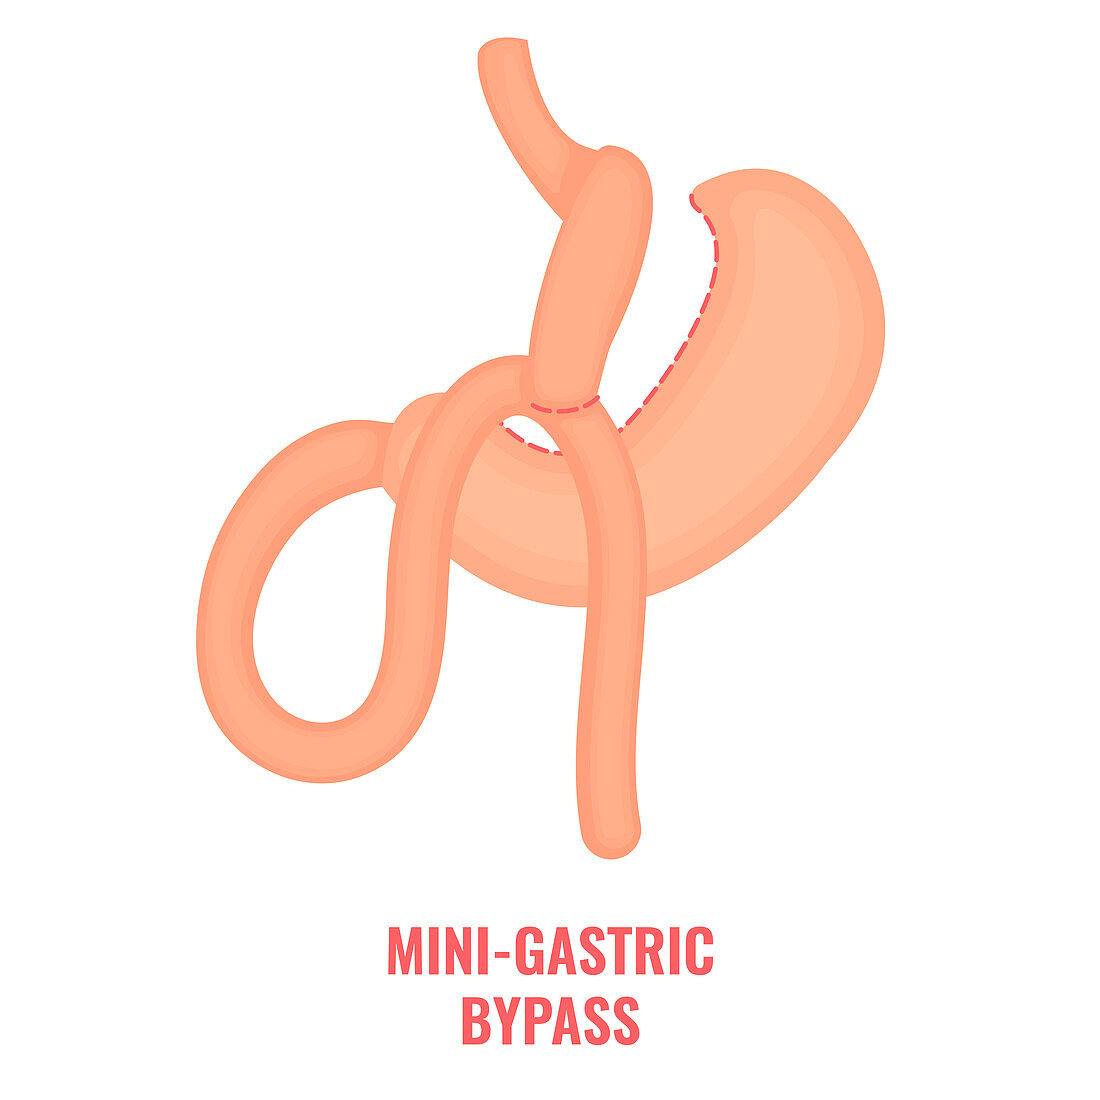 Mini gastric bypass bariatric surgery, illustration